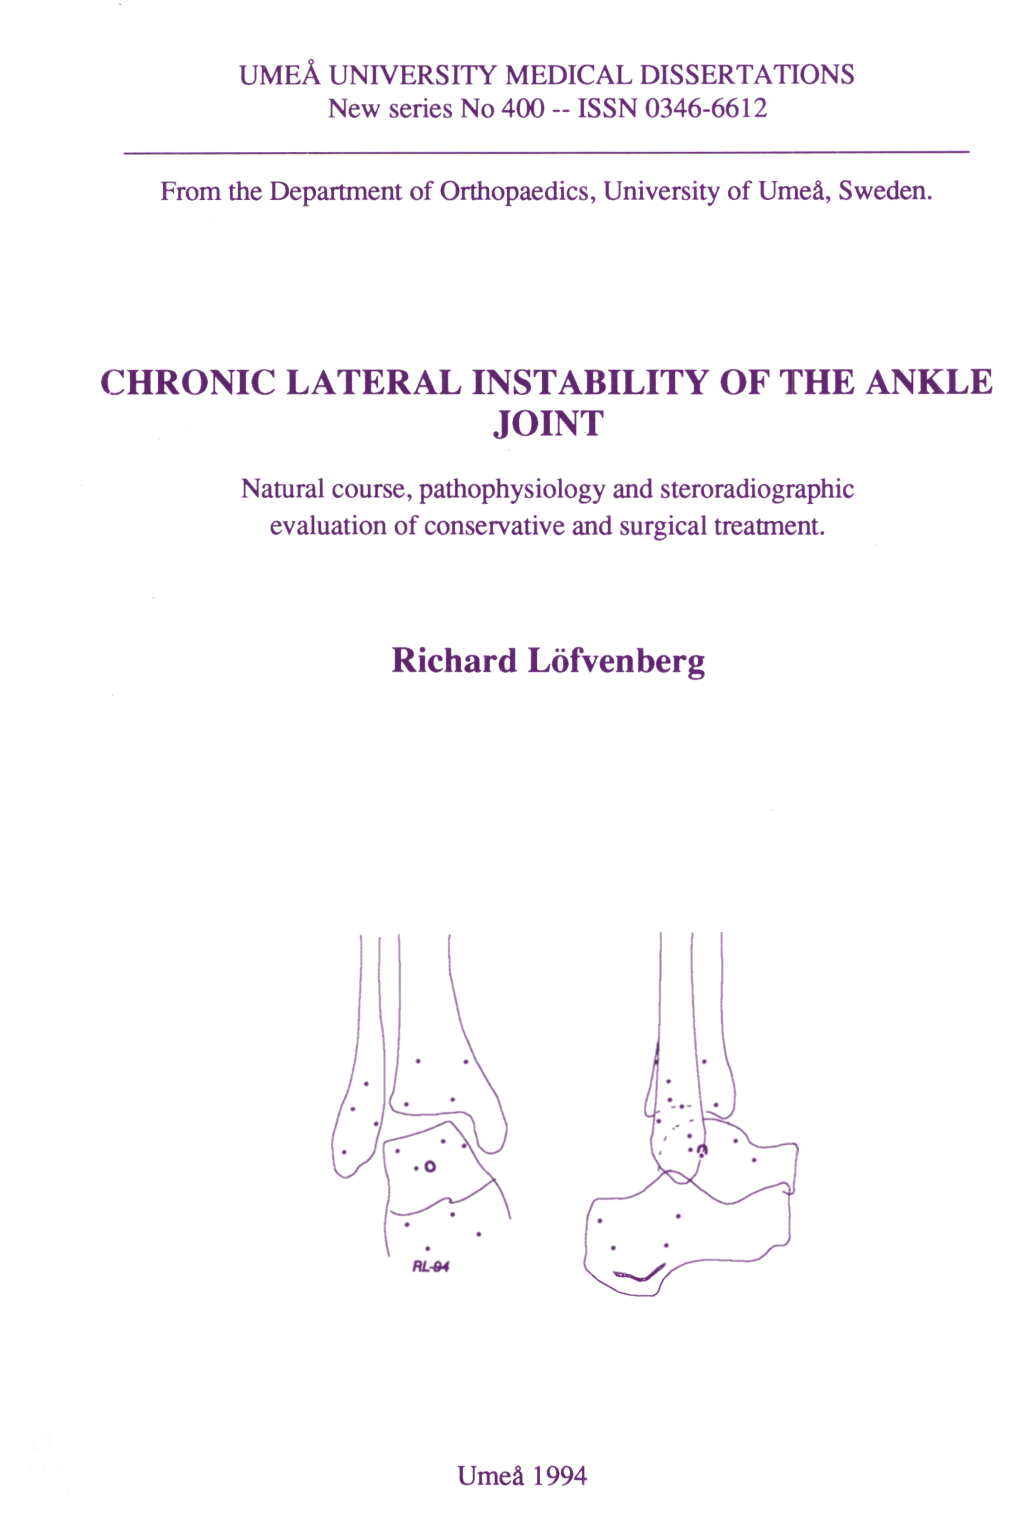 CHRONIC LATERAL INSTABILITY of the ANKLE JOINT Richard